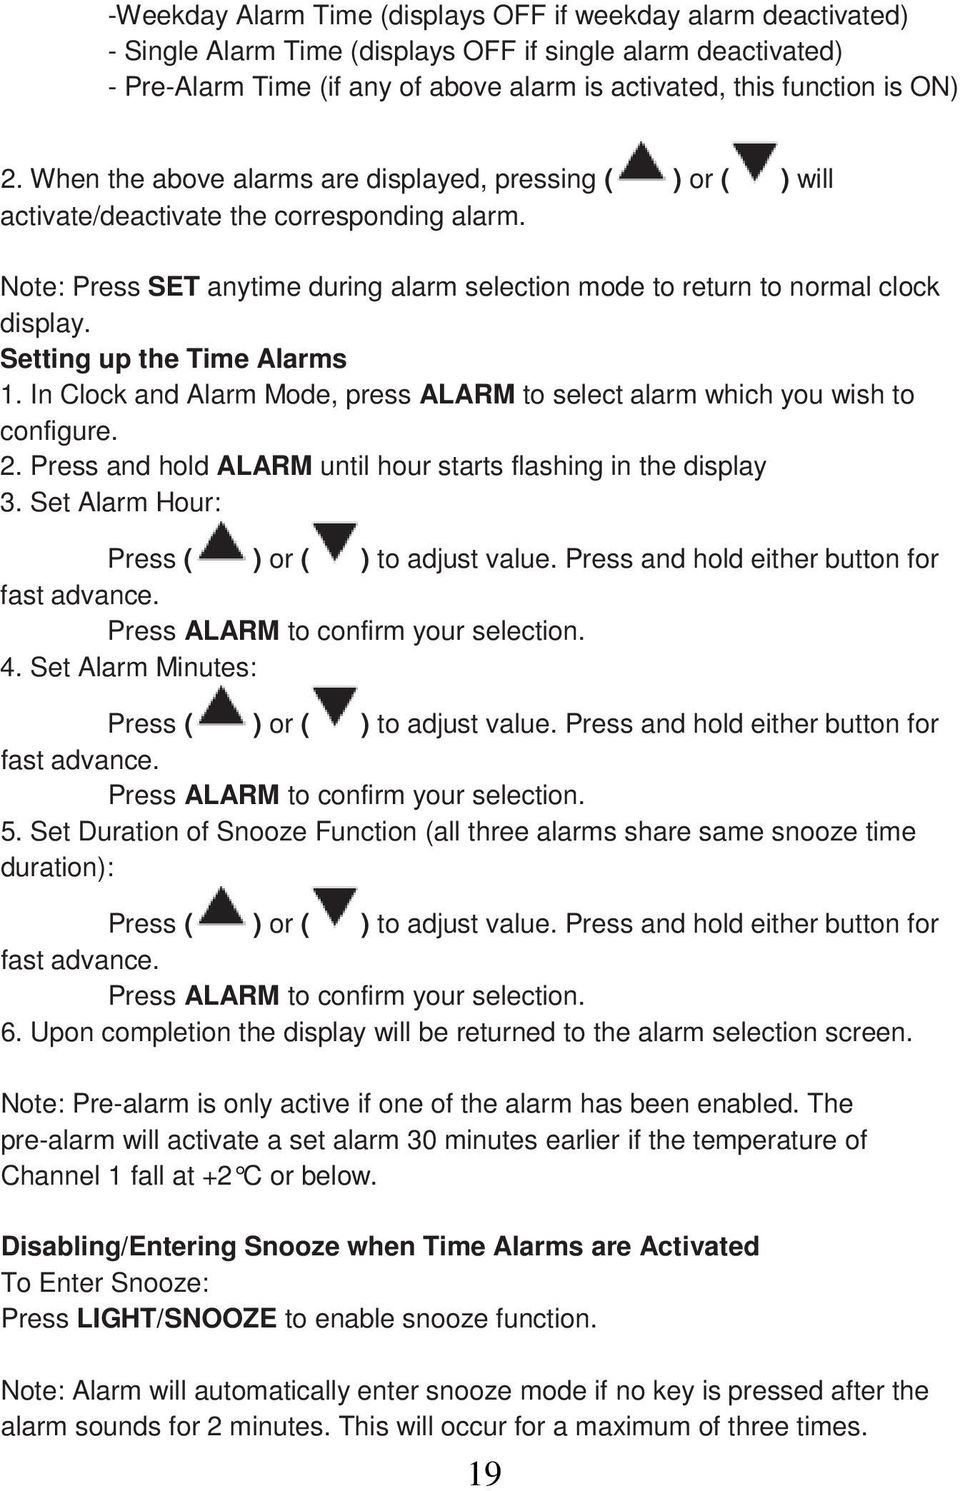 Setting up the Time Alarms 1. In Clock and Alarm Mode, press ALARM to select alarm which you wish to configure. 2. Press and hold ALARM until hour starts flashing in the display 3.